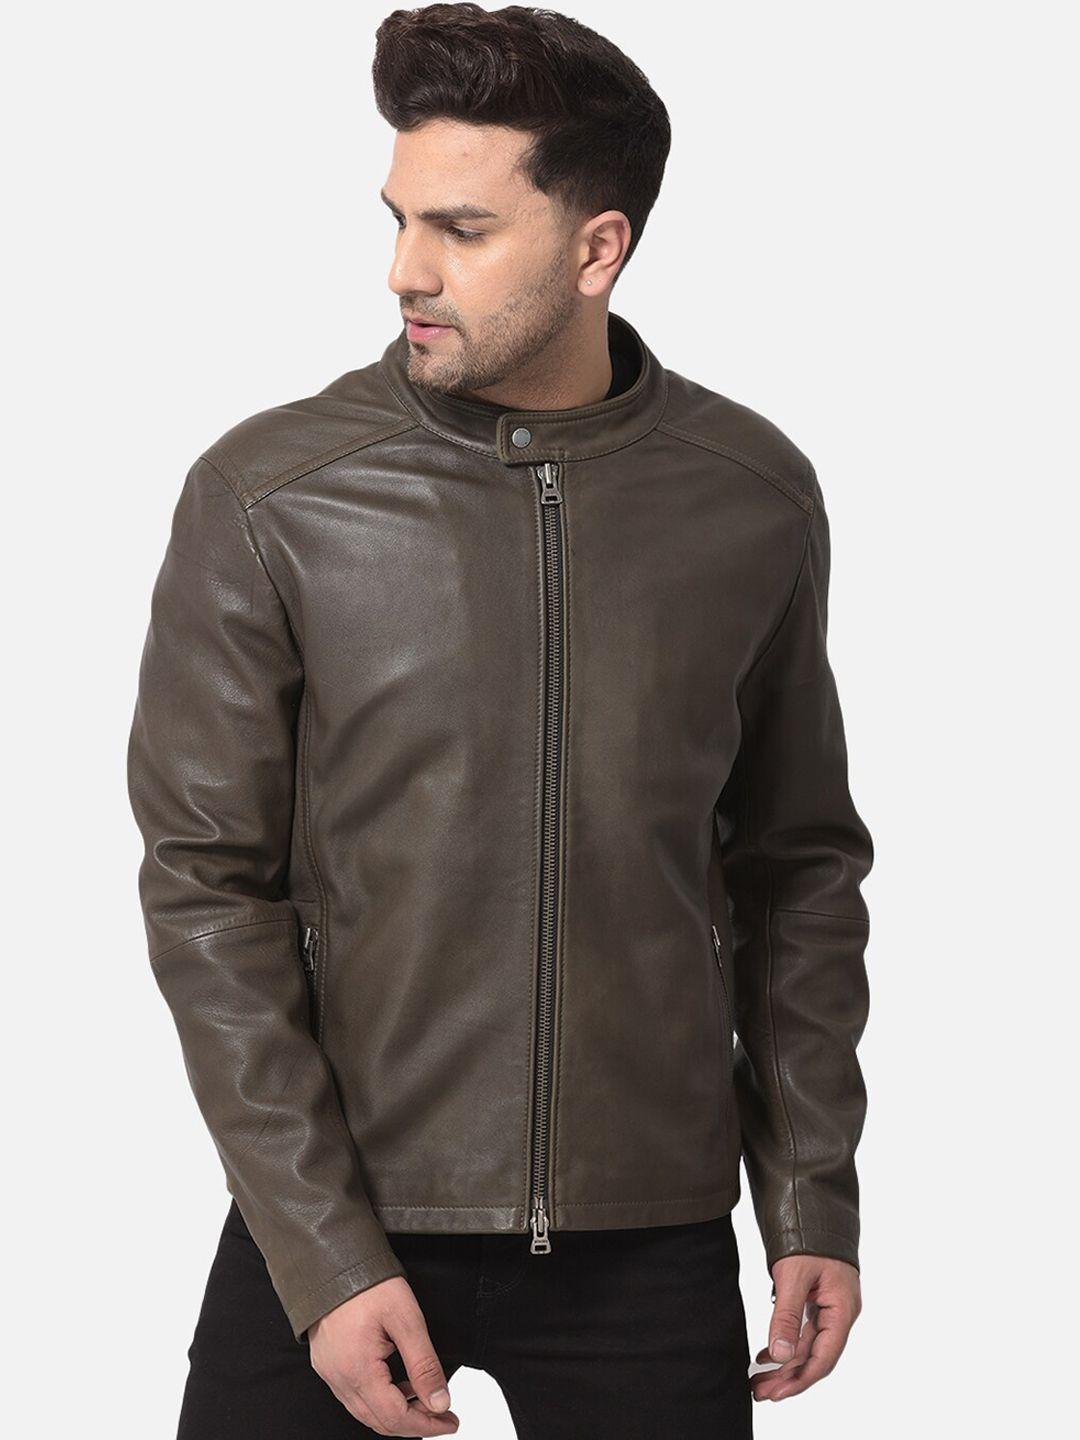 woods-men-olive-green-leather-water-resistant-bomber-with-embroidered-jacket